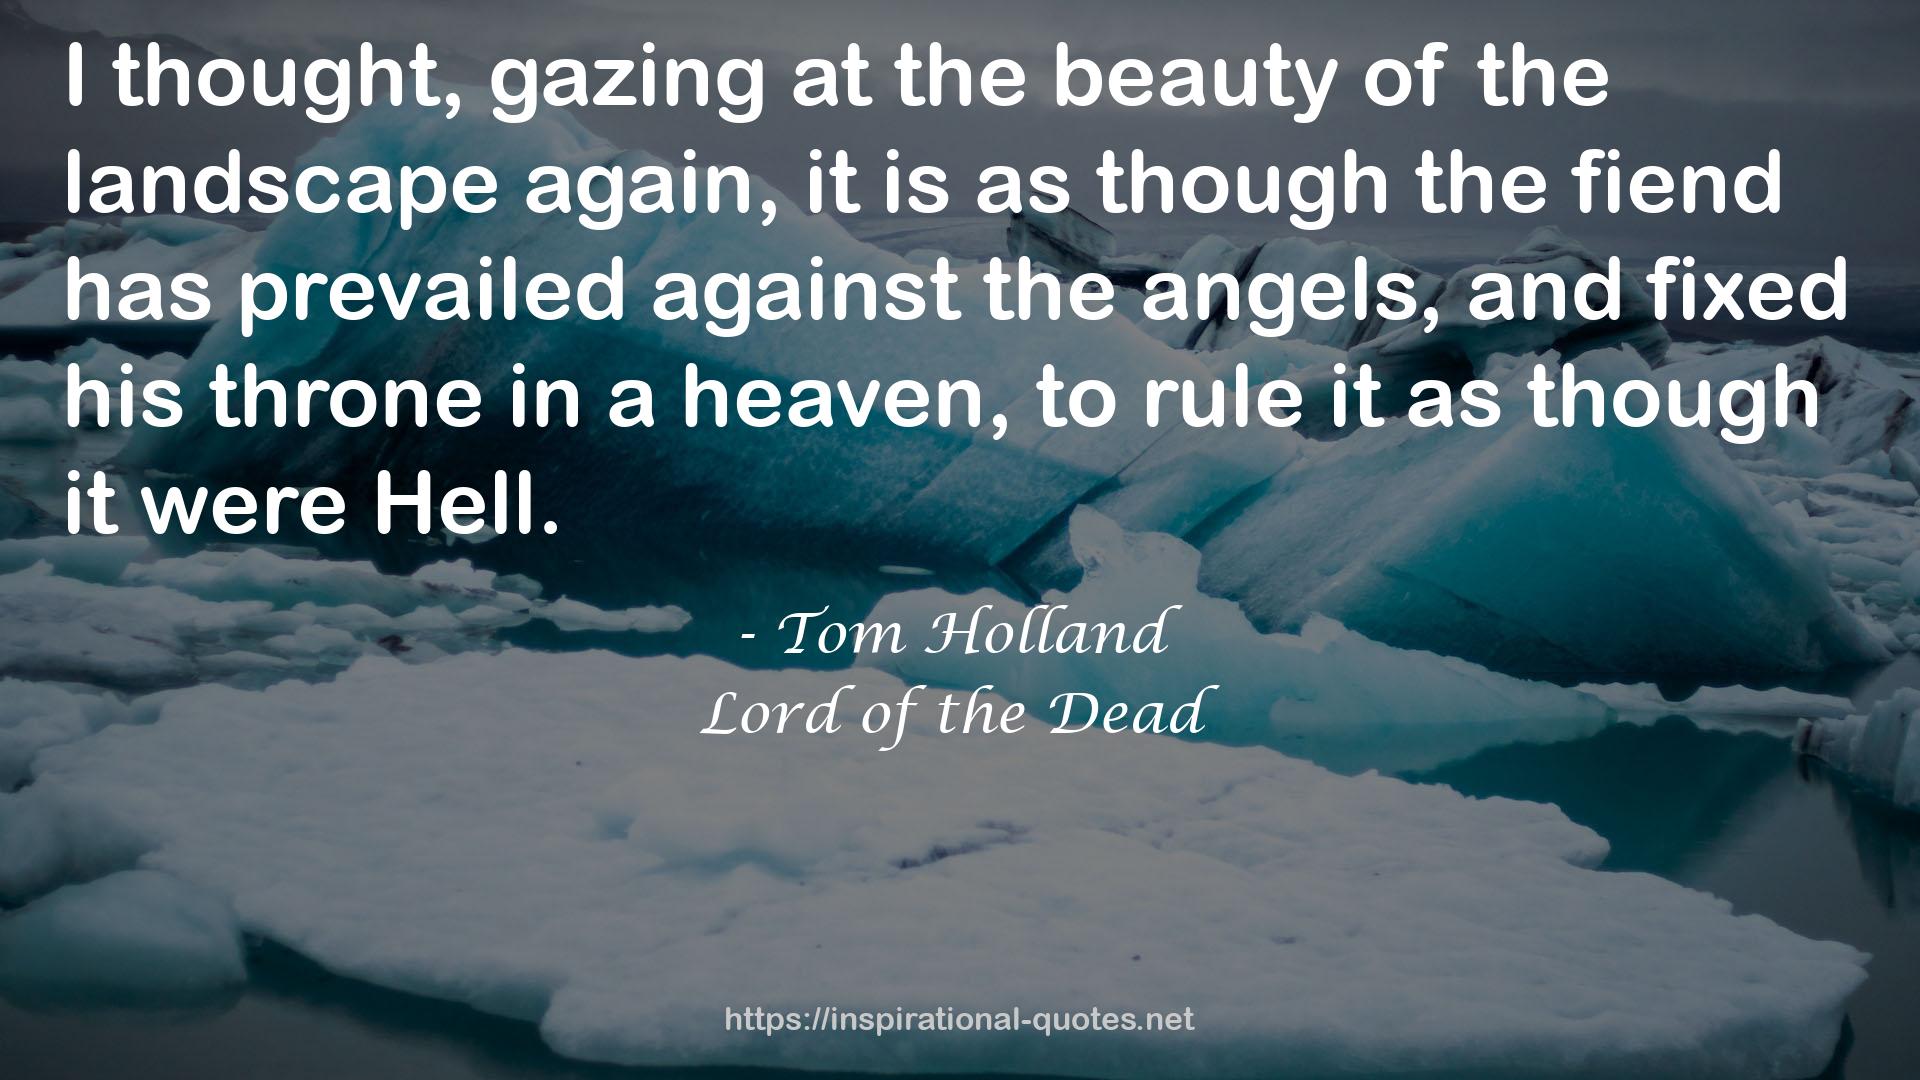 Lord of the Dead QUOTES